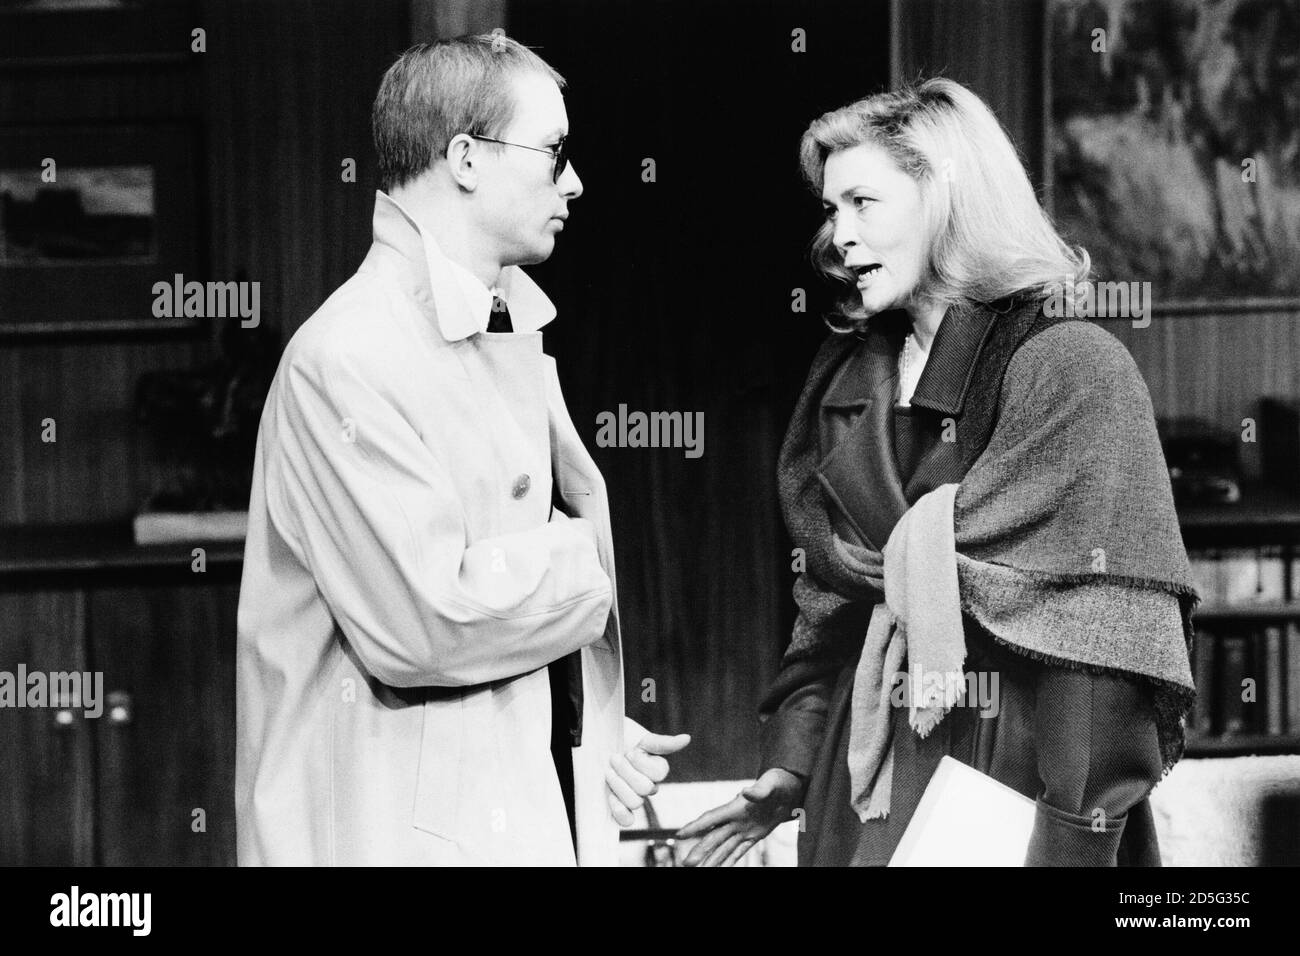 Stephen Jenn (Bravo) and Faye Dunaway (Circe) in CIRCE & BRAVO by Donald Freed at the Hampstead Theatre, London NW3  05/06/1986  set design: Eileen Diss  costumes: Jane Robinson  lighting: Mick Hughes  fights: Jonathan Howell  director: Harold Pinter         (c) Donald Cooper/Photostage   photos@photostage.co.uk   ref/BW-P-266-33 Stock Photo